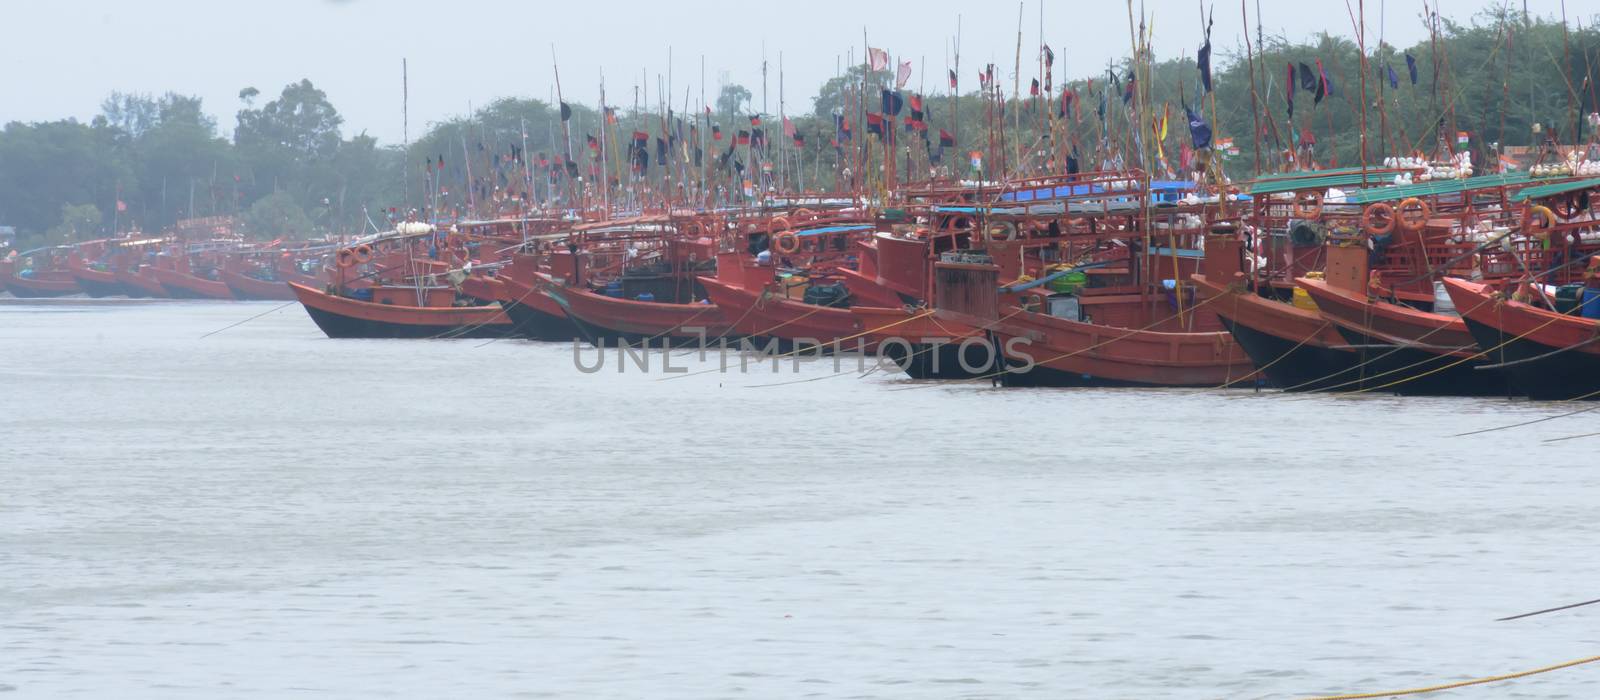 Many Commercial nautical sea vessels like trawler boat ship sailboat, all Red and Black Color code to strength coastal security anchored in protected nautical mile zone area. Midnapore, India May 2019 by sudiptabhowmick